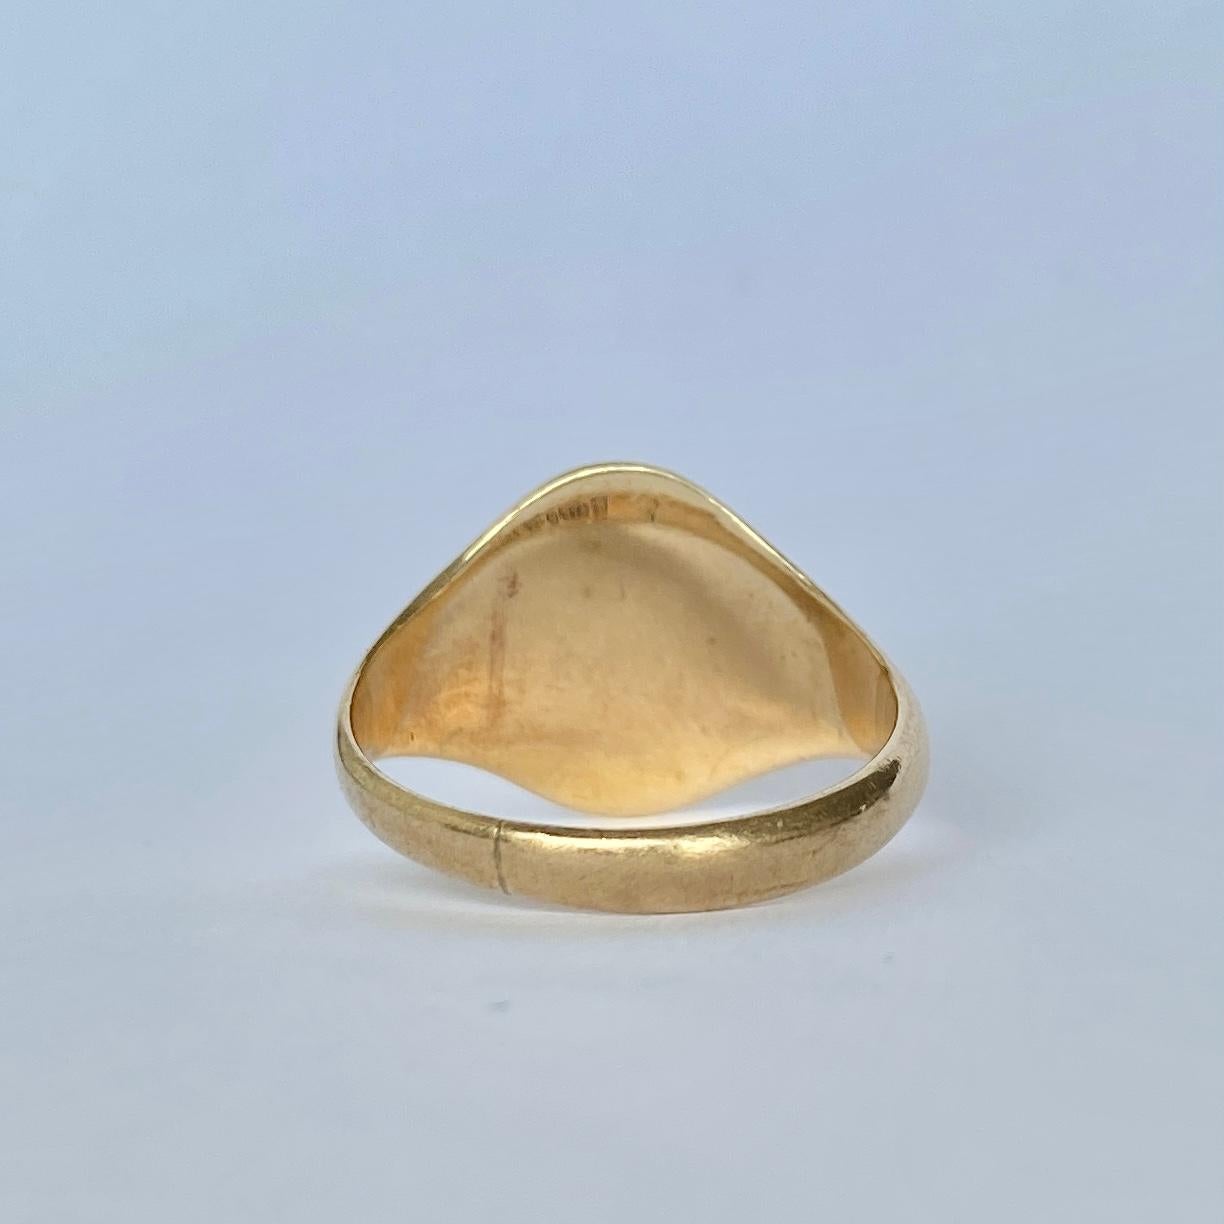 The fluid scroll font which reads 'JHL' is finely engraved onto the face of this ring. The shoulders are smooth and carry on down into a plain band modelled in 9ct gold. This signet ring is fully hallmarked Chester 1856. 

RIng Size: O or 7 1/4